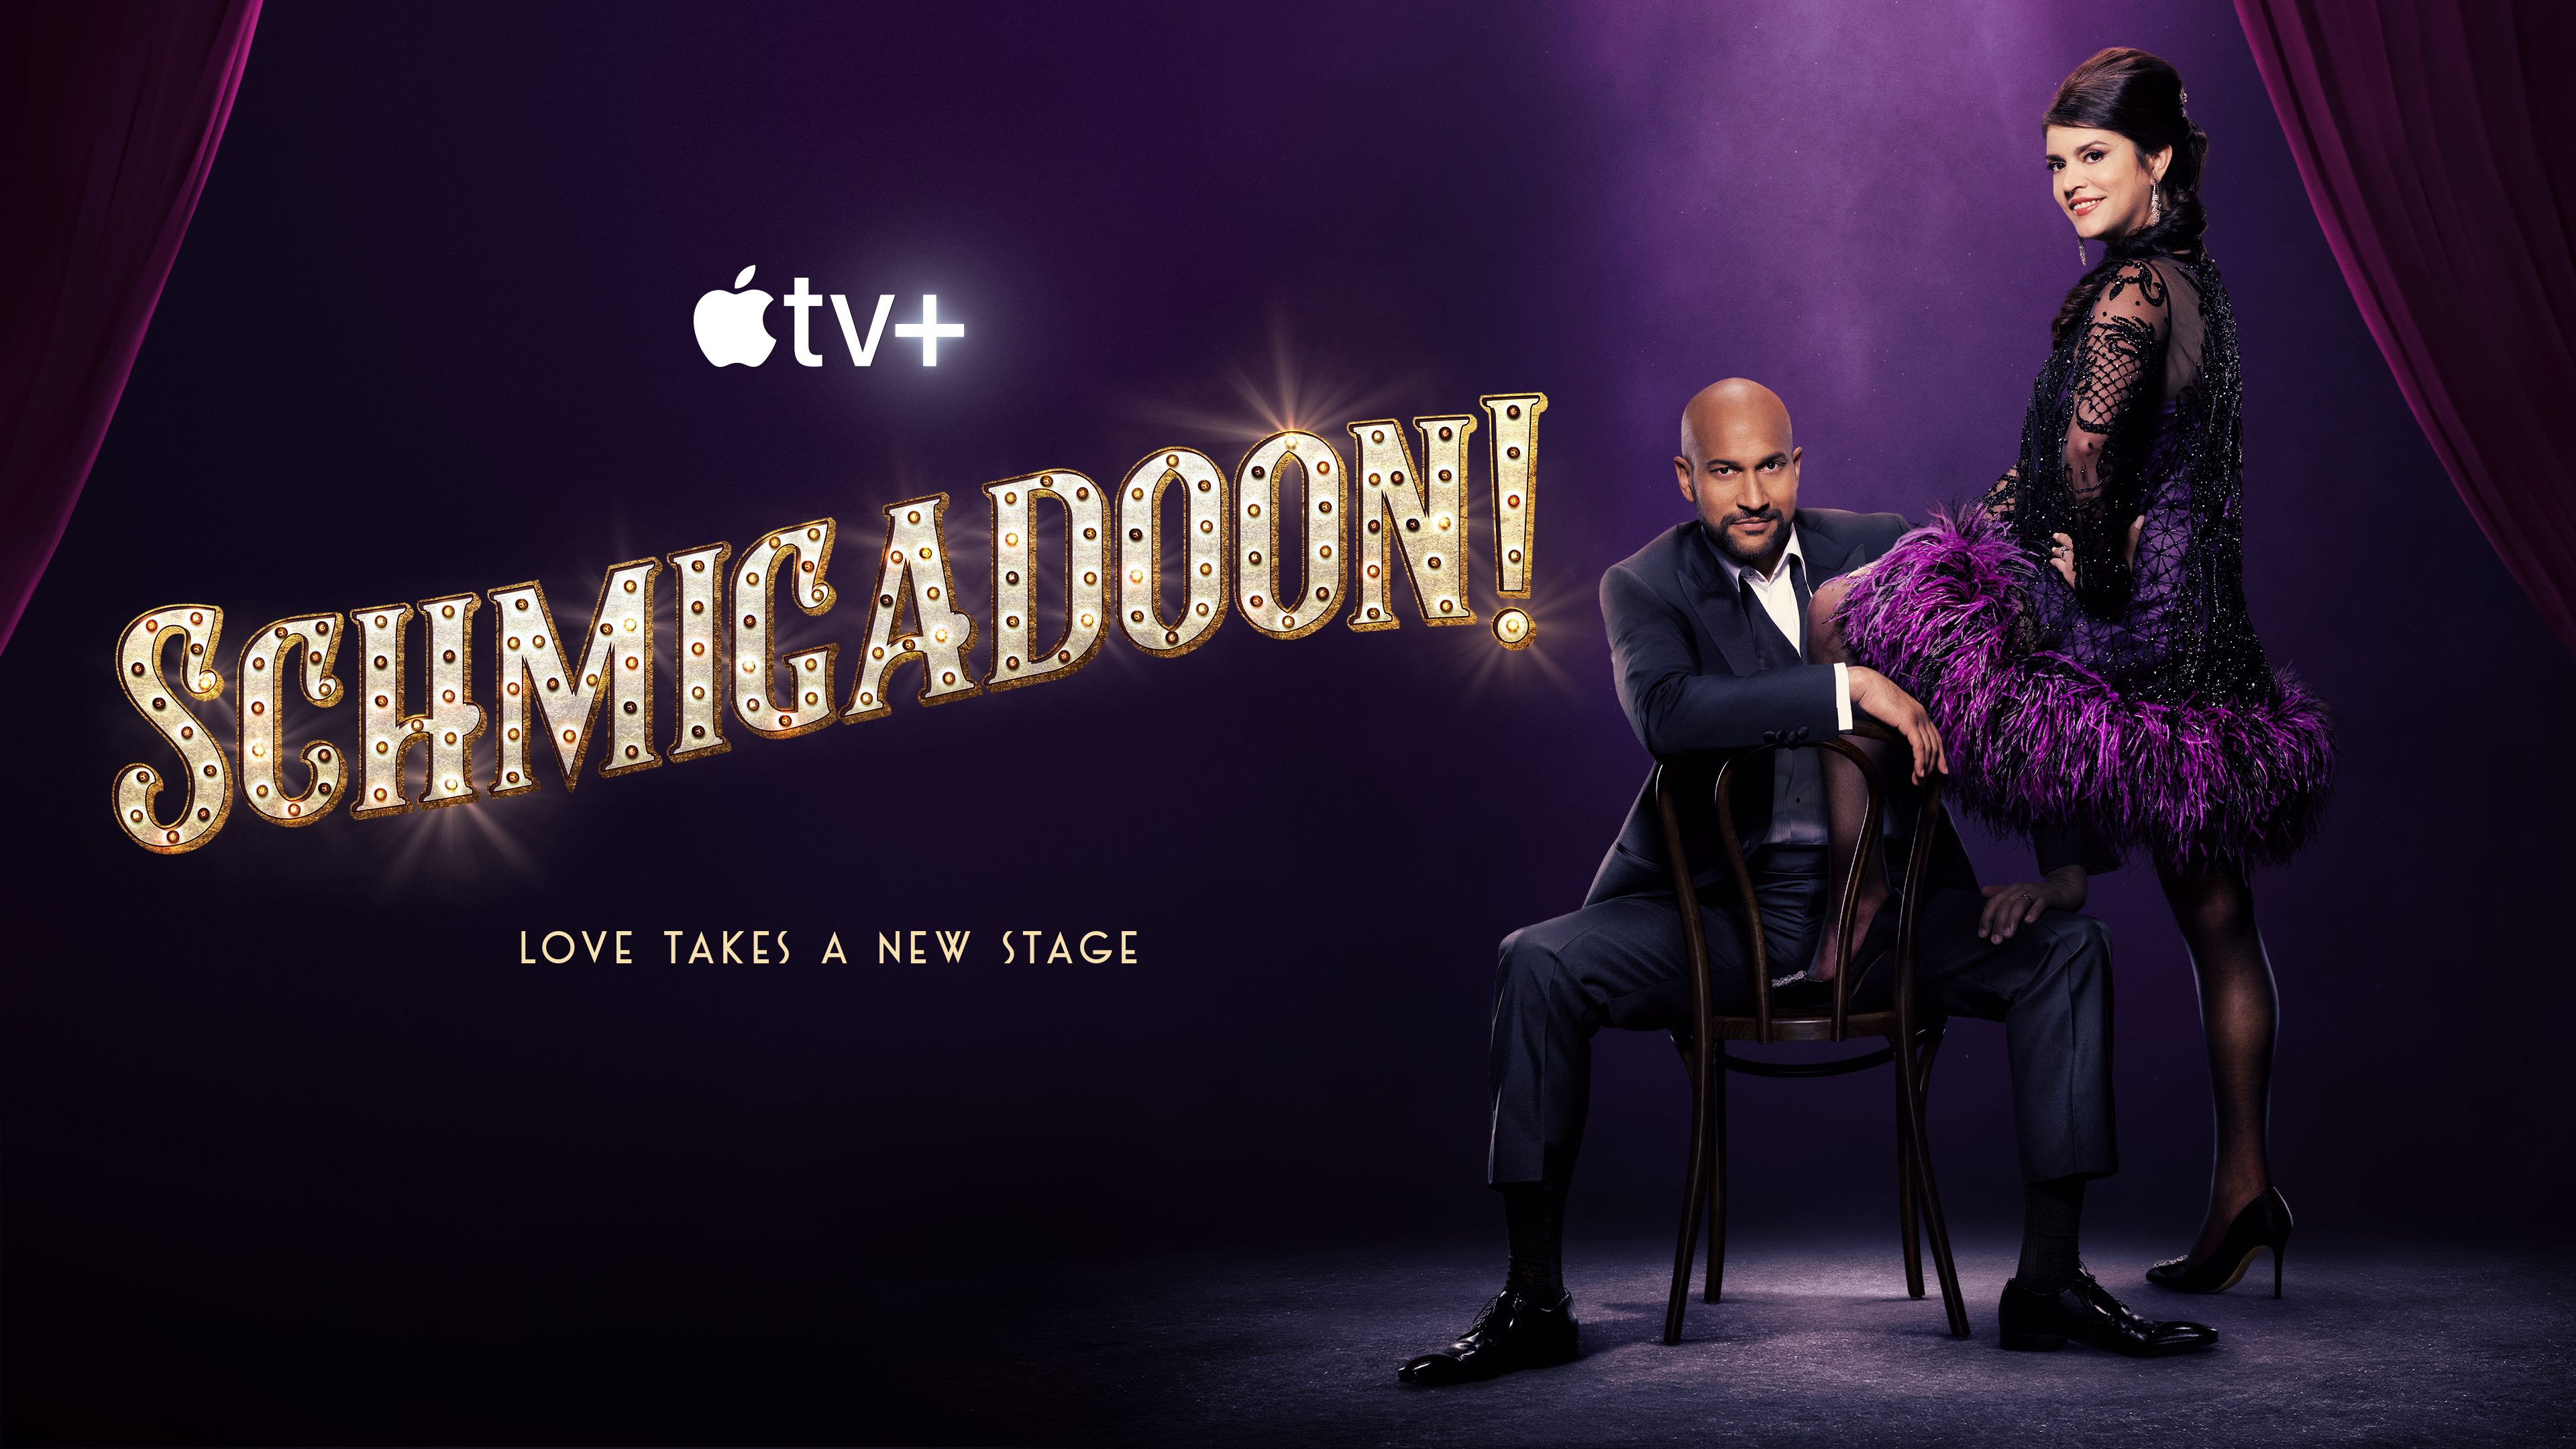 Schmigadoon Cast - Every Actor and Character in the Apple TV+ Series